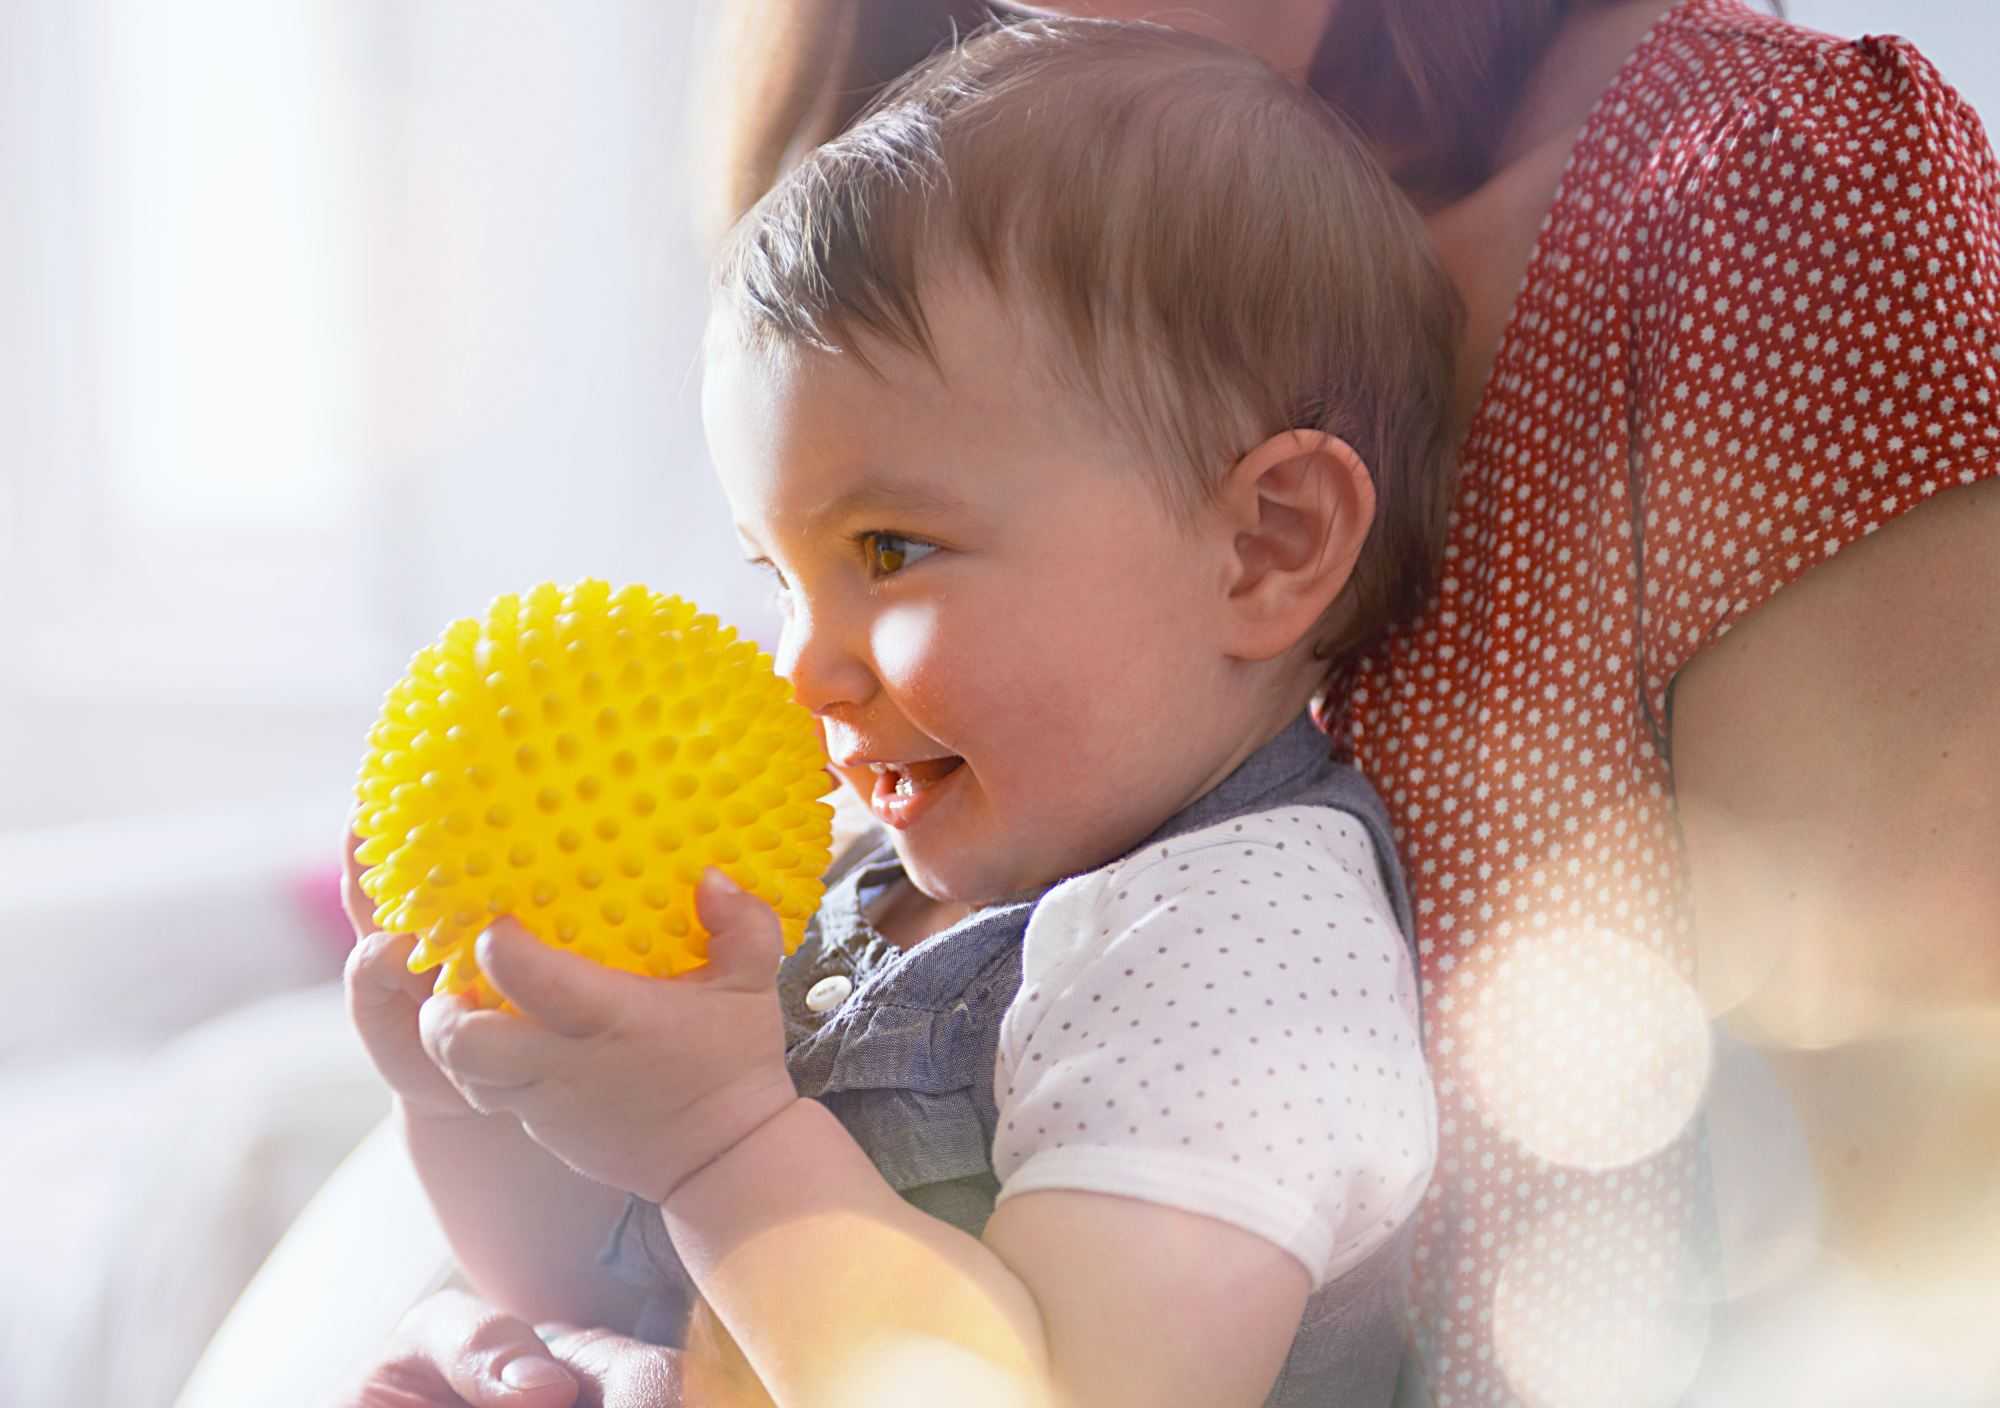 Child with a yellow ball